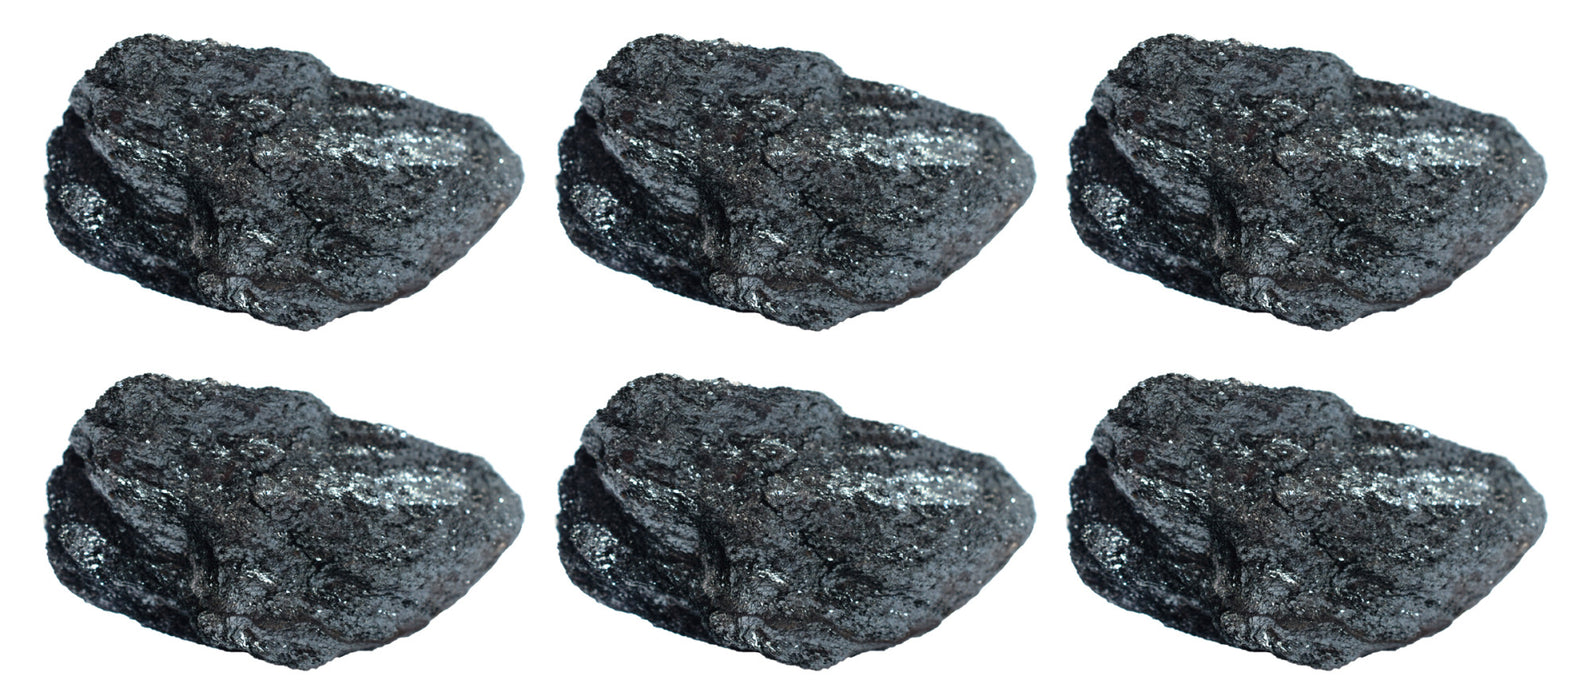 6PK Raw Hematite, Mineral Specimens, ± 1" Each - Great for Science Classrooms - Class Pack